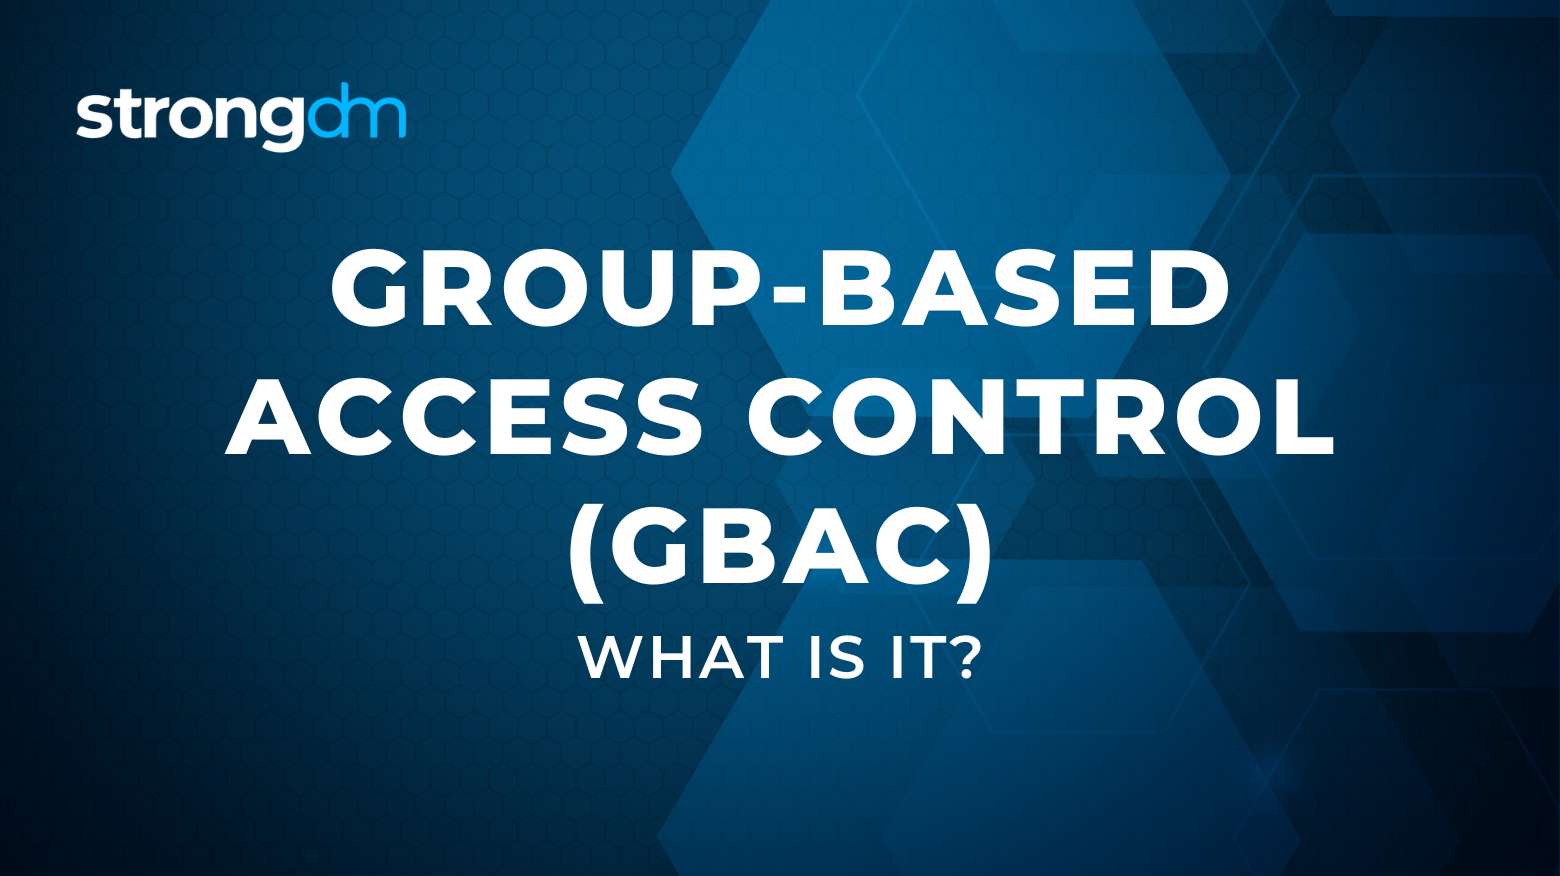 What Is Group-Based Access Control (GBAC)? 